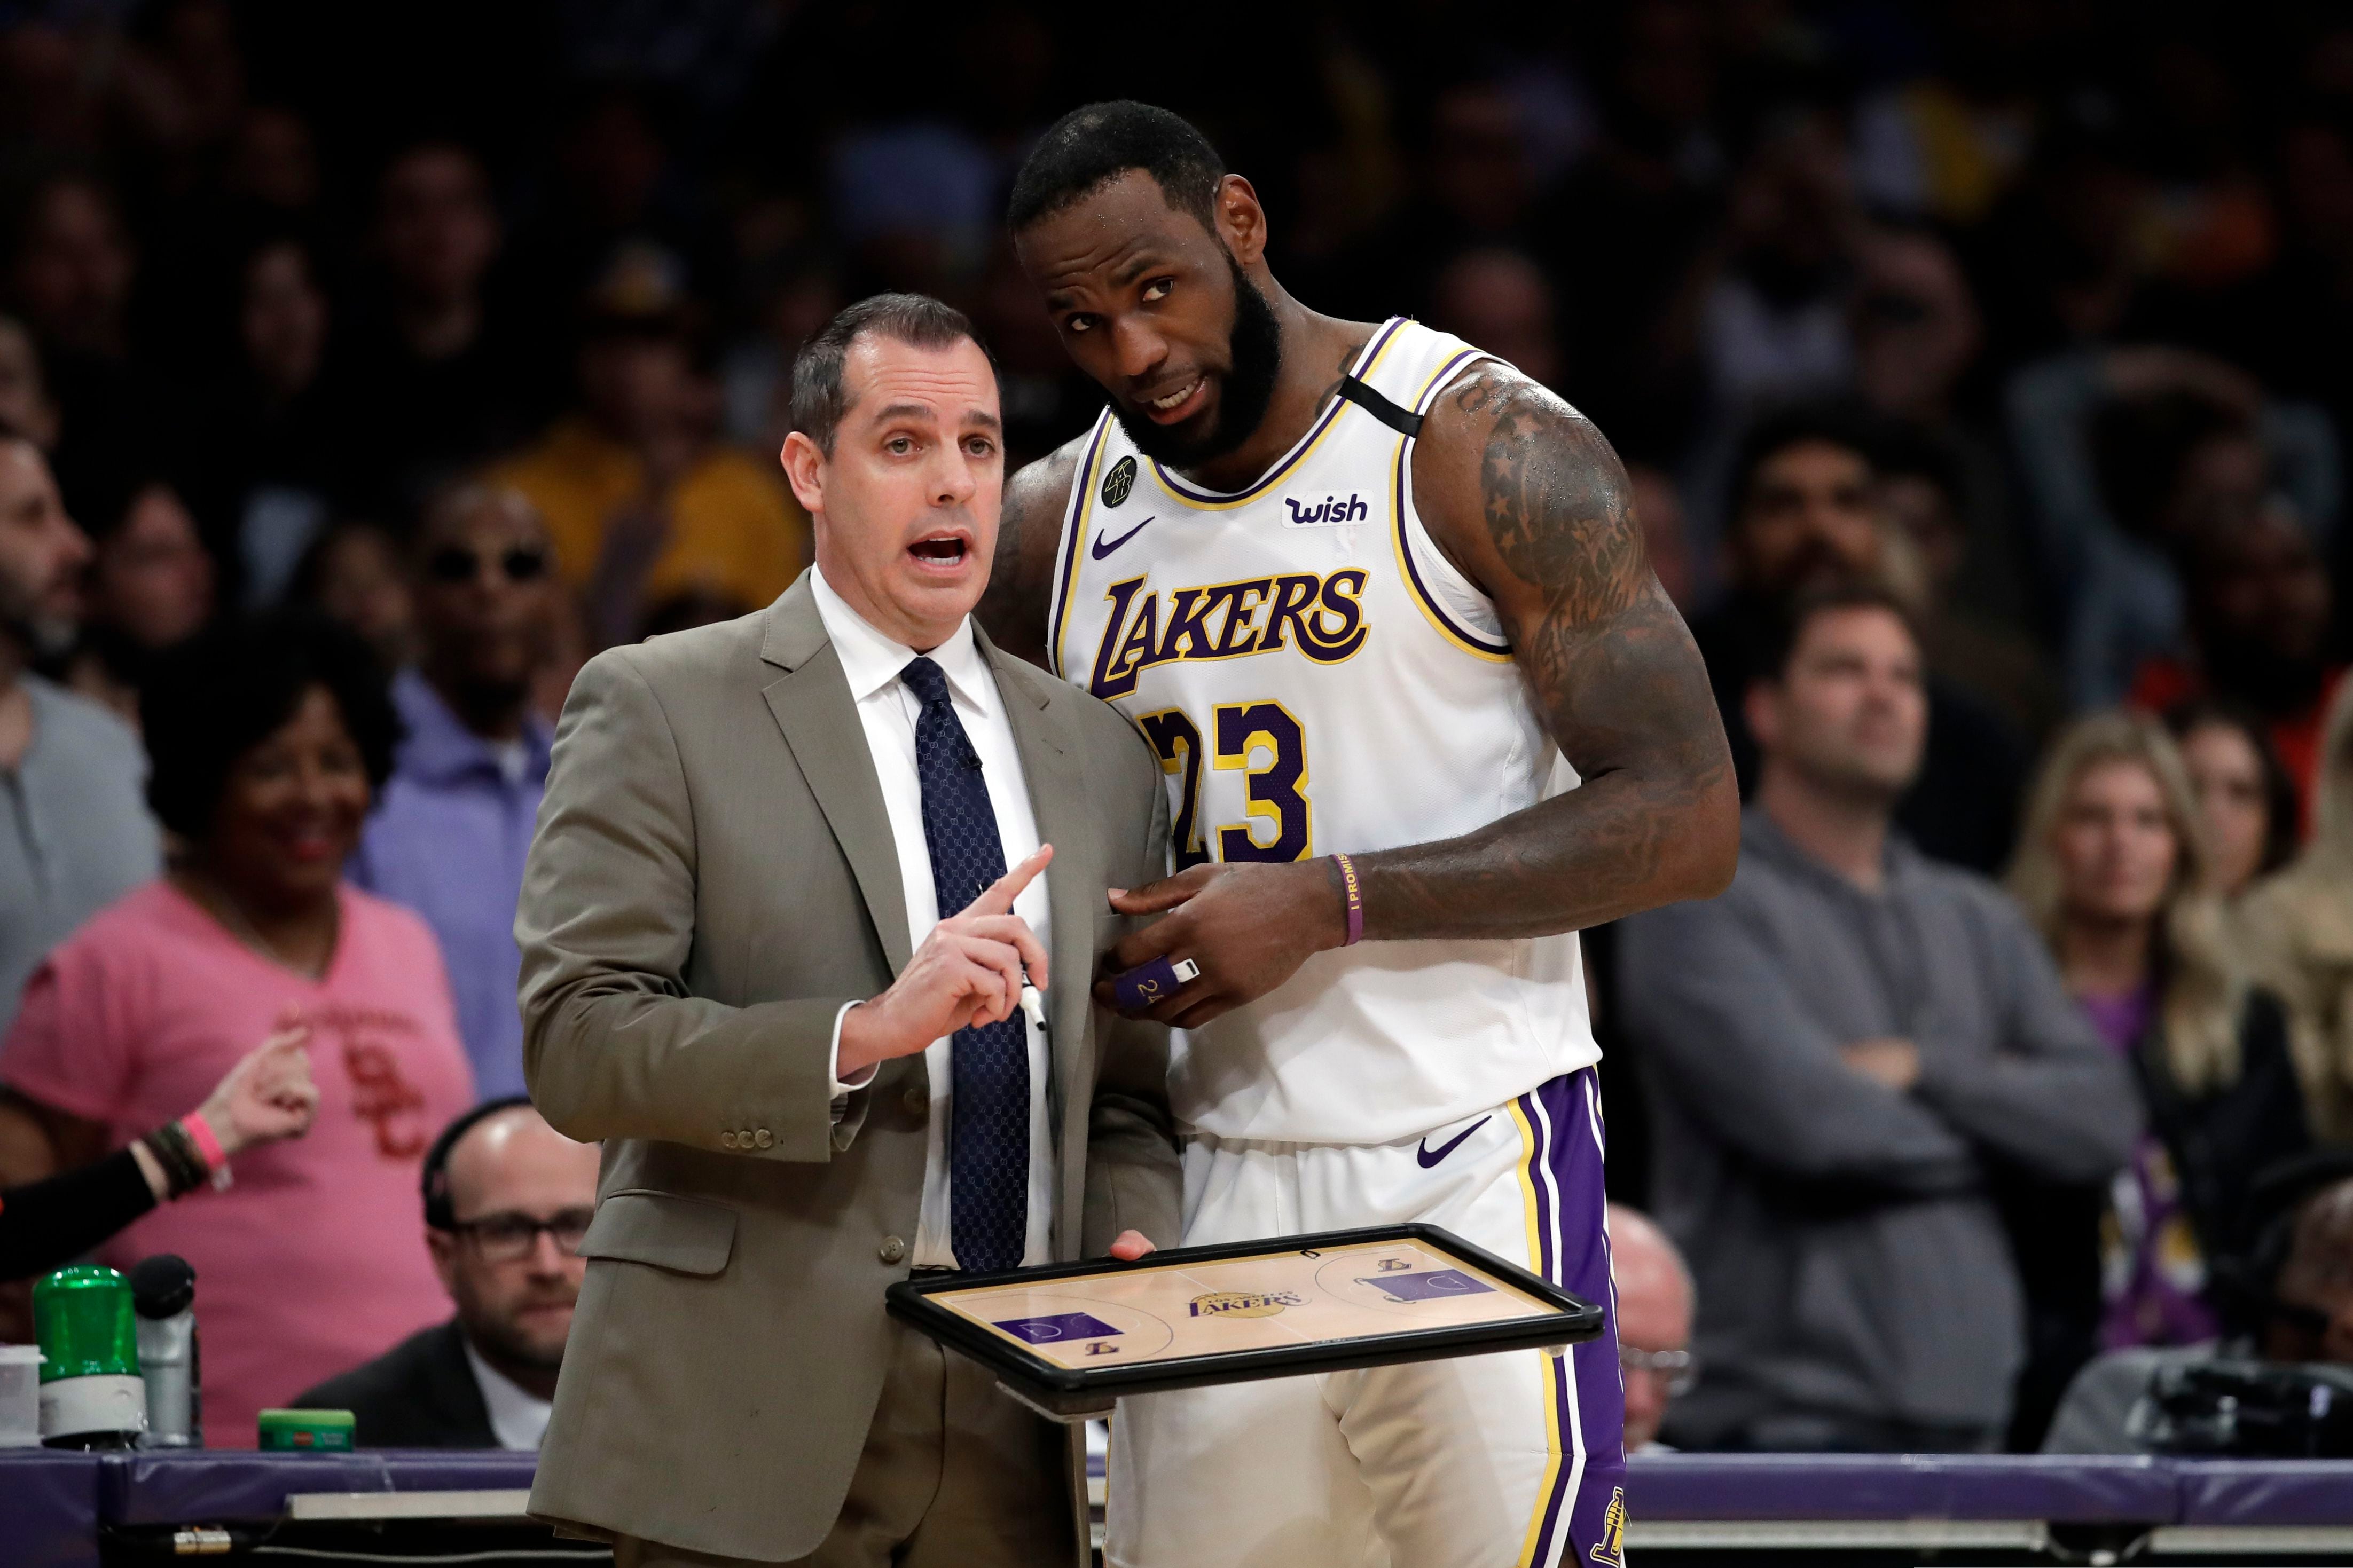 Time off helped mold Wildwood's Frank Vogel into an NBA championship coach with Los Angeles Lakers